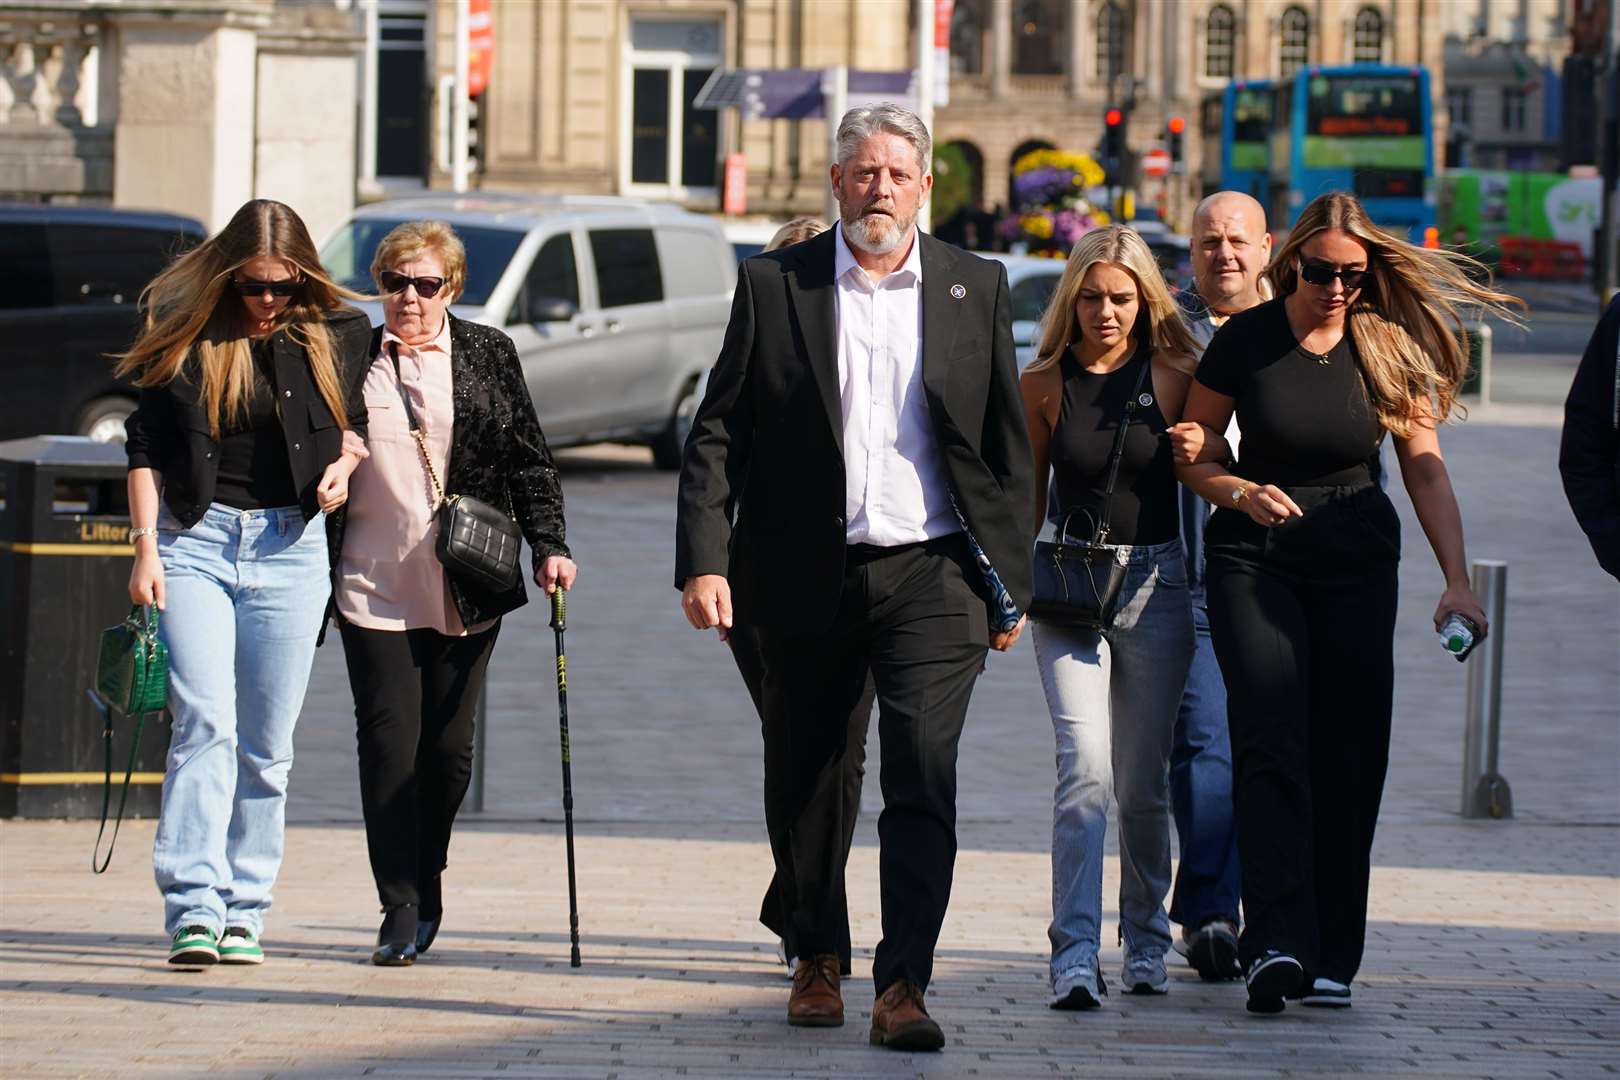 The father of Elle Edwards, Tim Edwards, arrives with family members at court in Liverpool on the first day of the trial of Connor Chapman for her murder (Peter Byrne/PA)